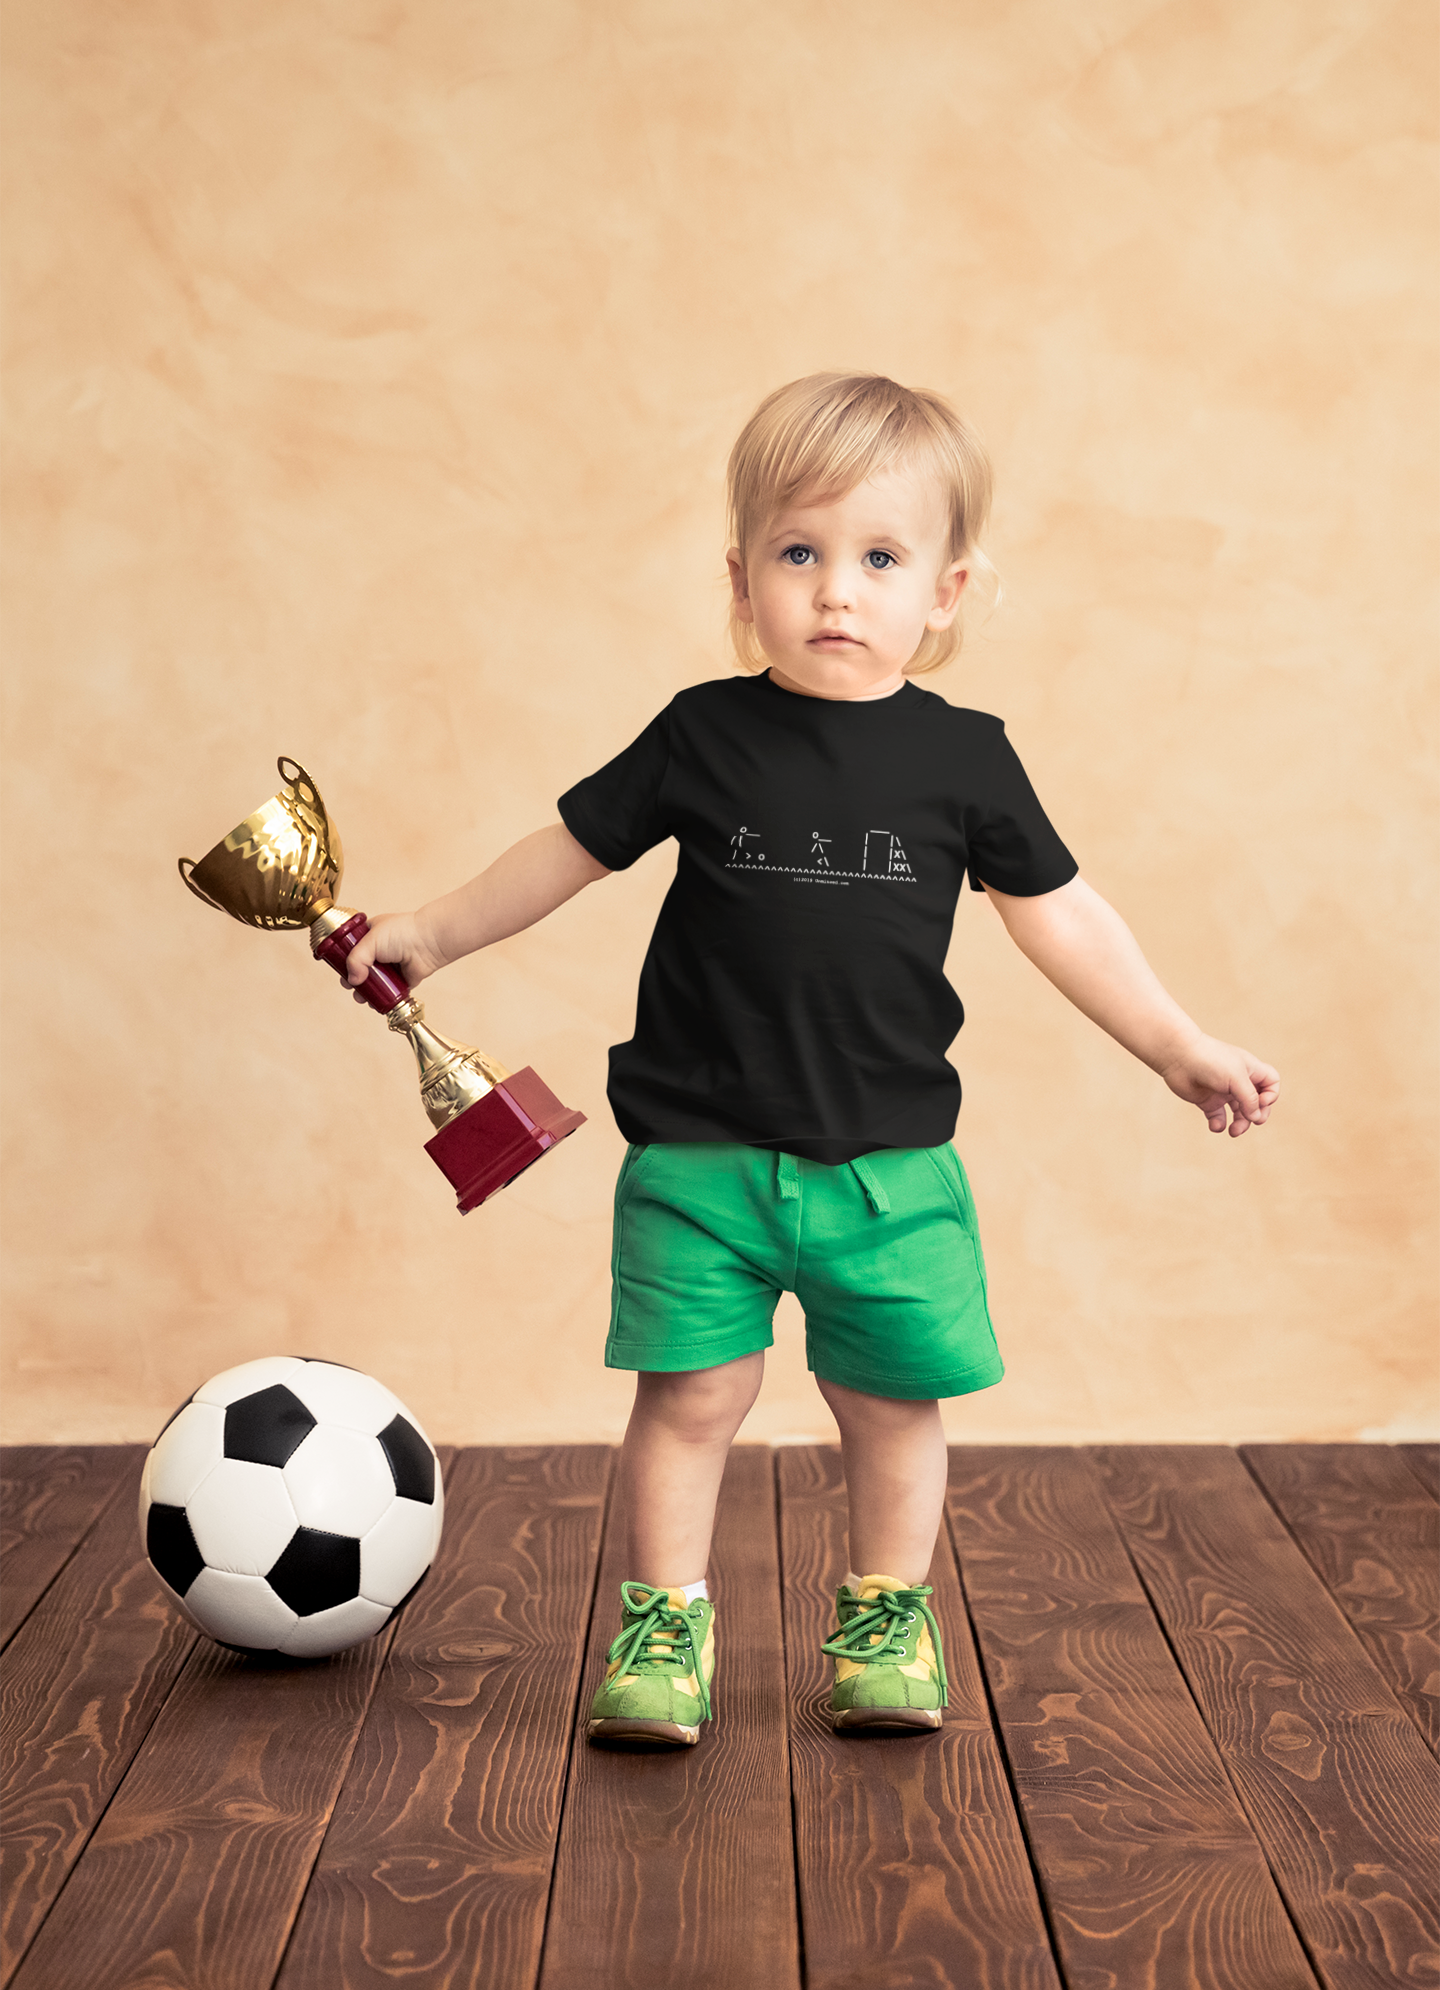 Score a goal with an assist from our soccer design